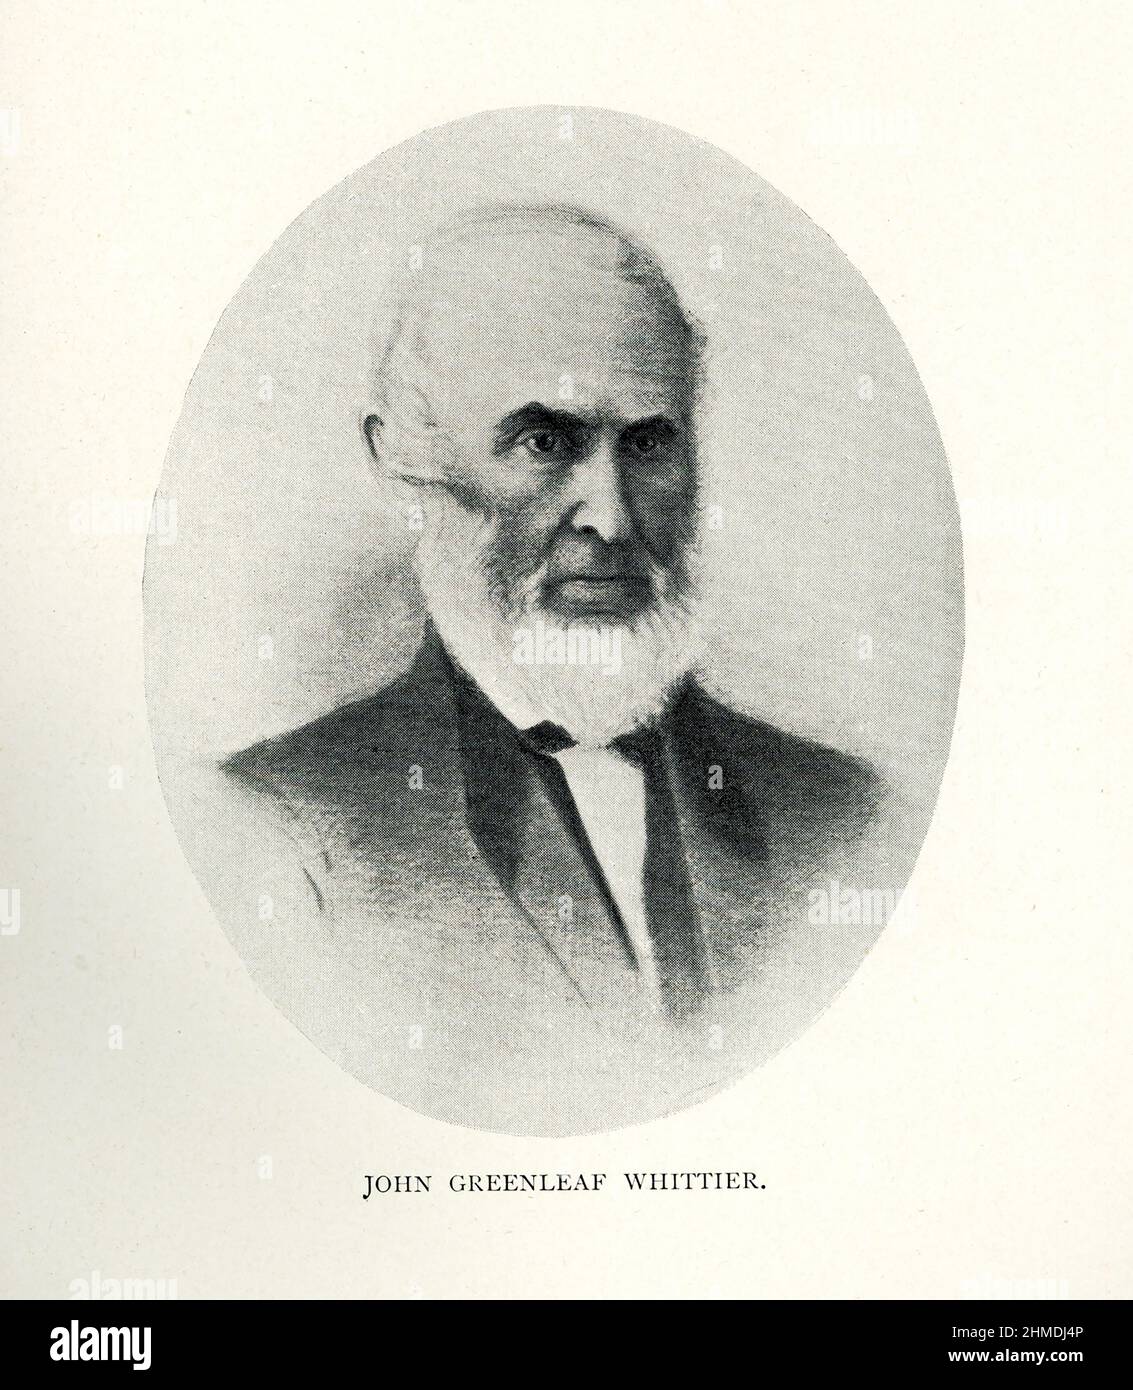 John Greenleaf Whittier (died 1892) was an American Quaker poet and advocate of the abolition of slavery in the United States. Frequently listed as one of the fireside poets, he was influenced by the Scottish poet Robert Burns. Whittier is remembered particularly for his anti-slavery writings, as well as his 1866 book Snow-Bound. Stock Photo